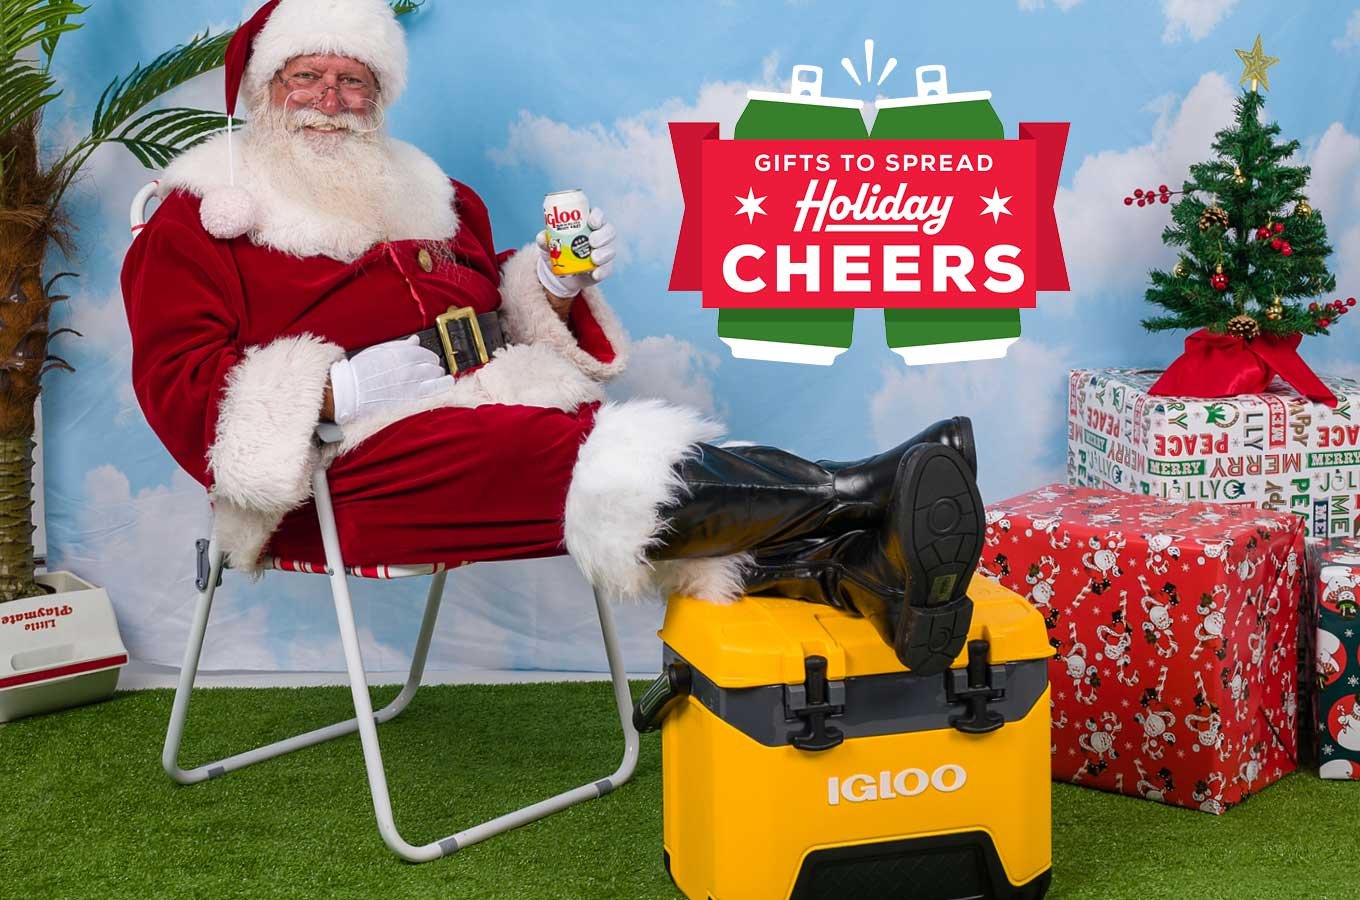 Igloo's Holiday Gift Guide